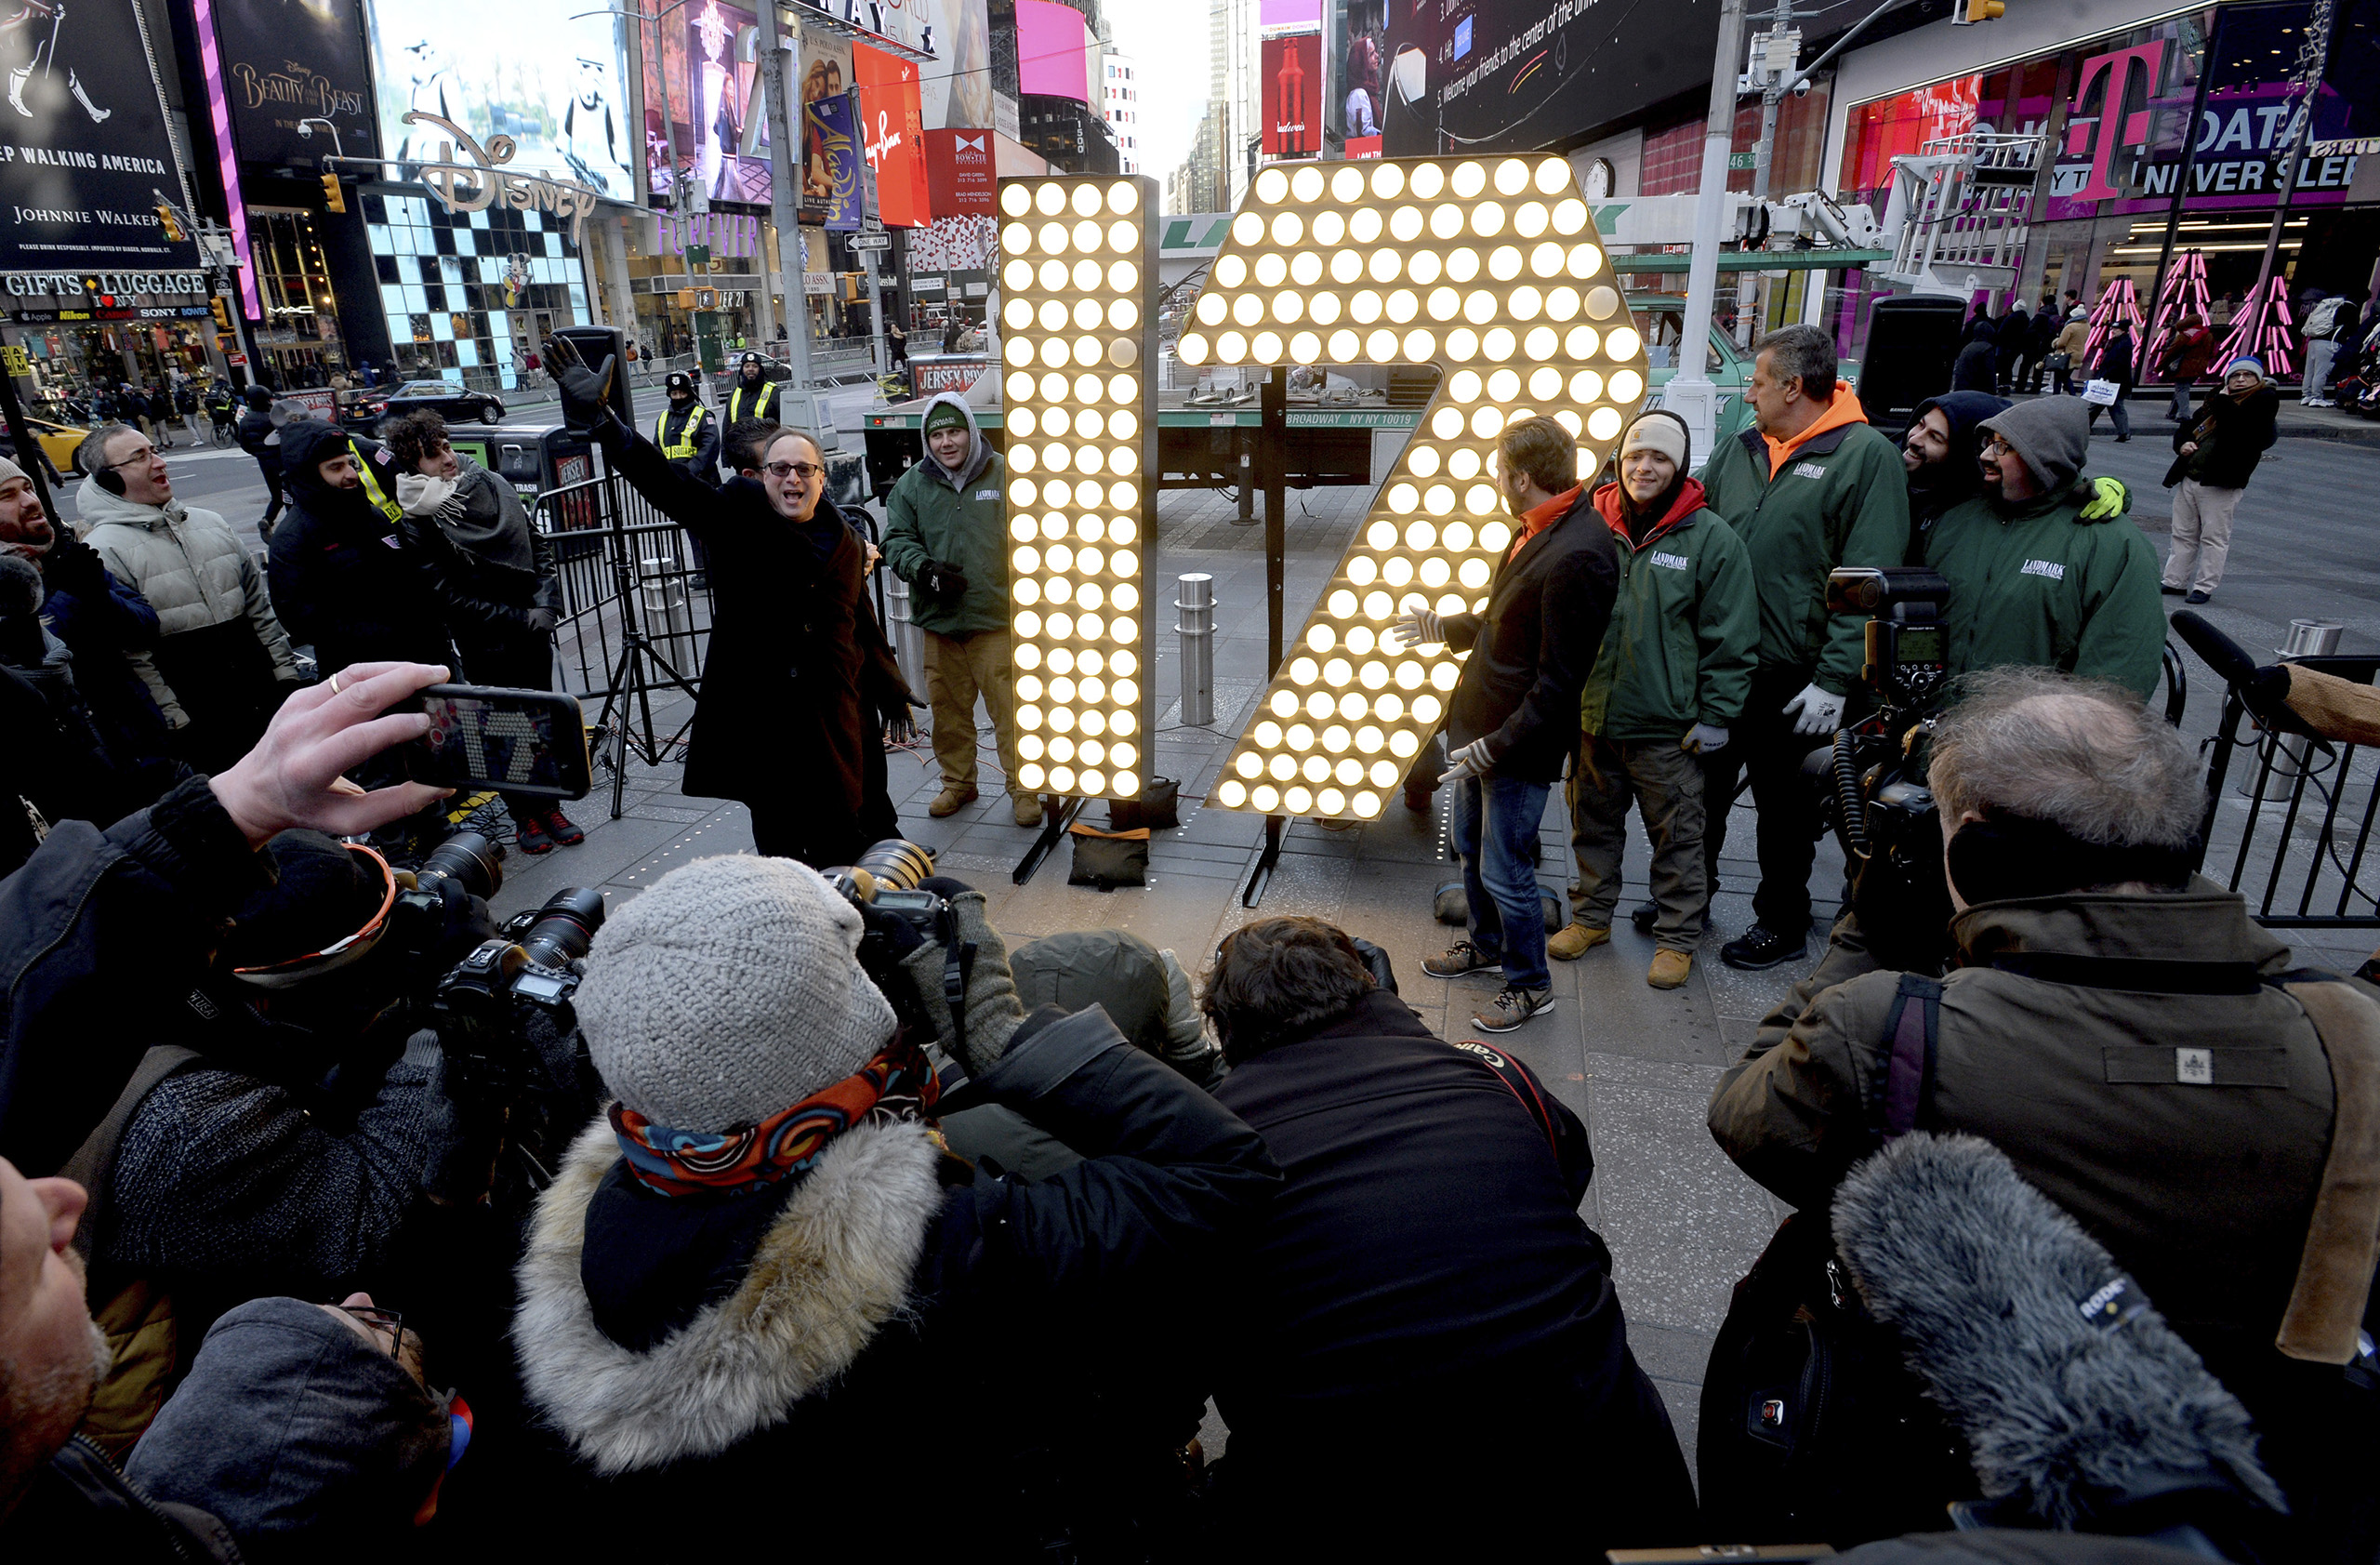 New Year Numerals Arrive In Times Square - NYC